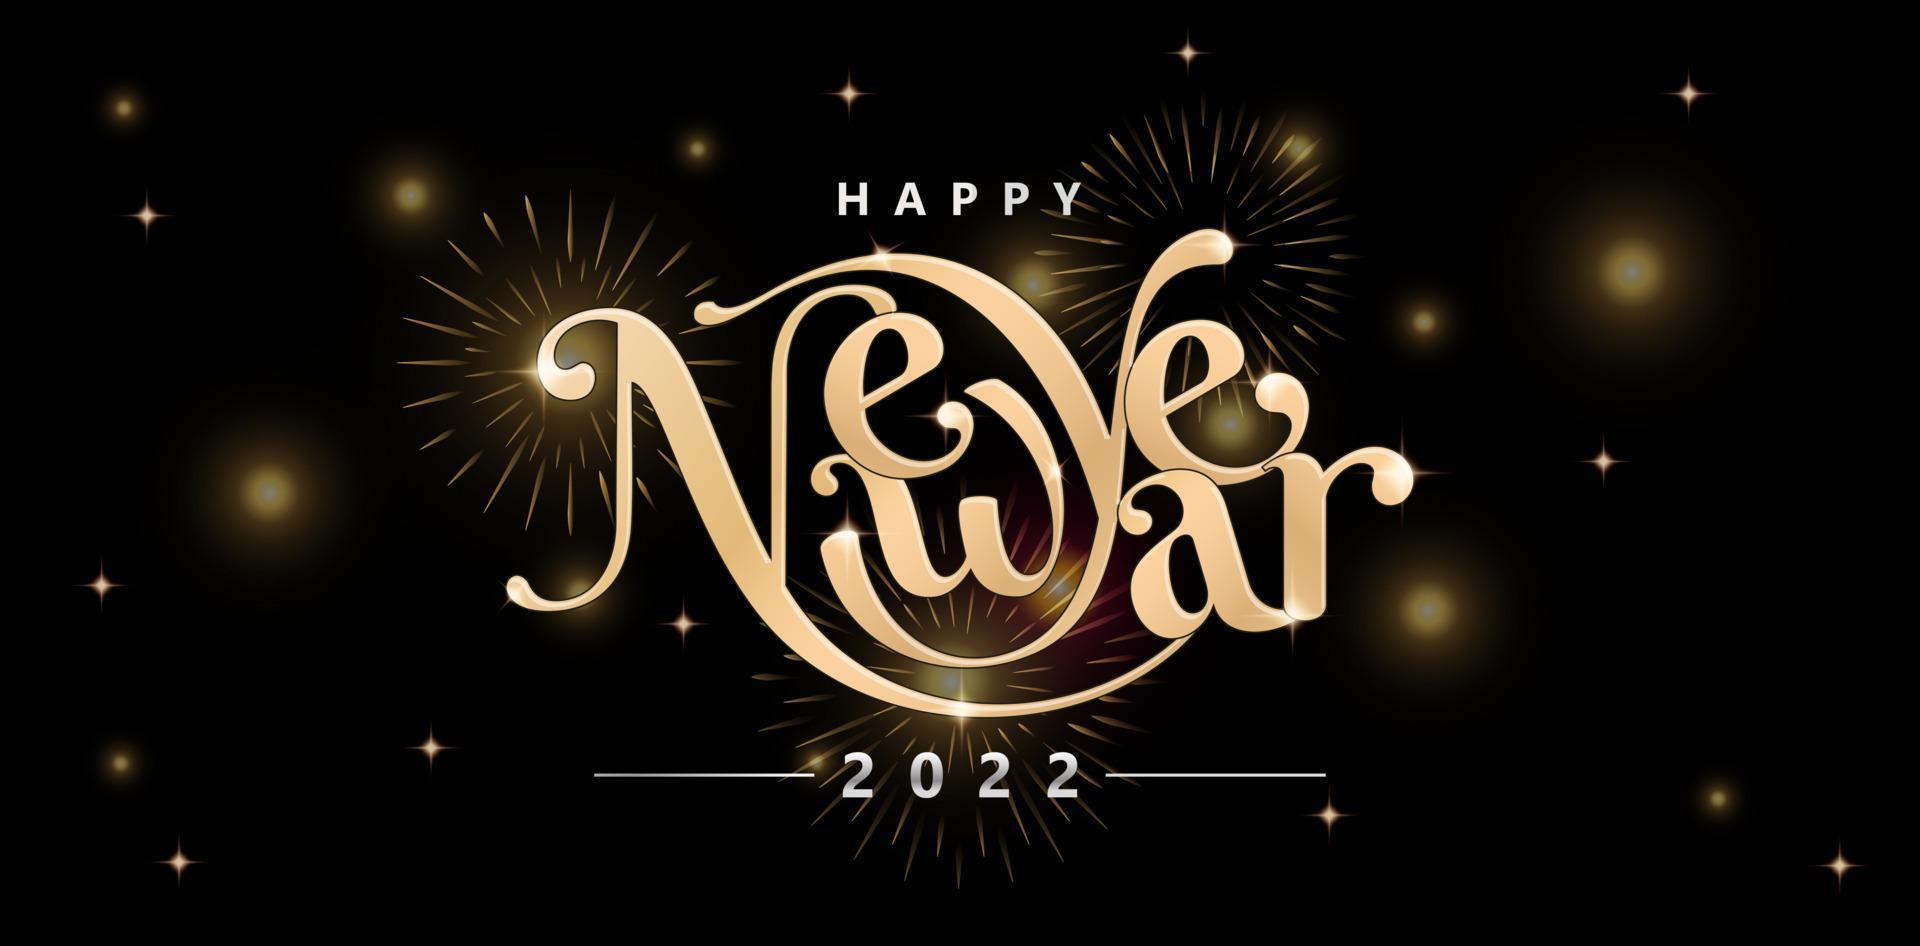 illustration of Happy New Year lettering fonts golden color with isolated black background, fireworks and glitter sparkle star decoration applicable for greeting cards, invitation, sign and banners. vector